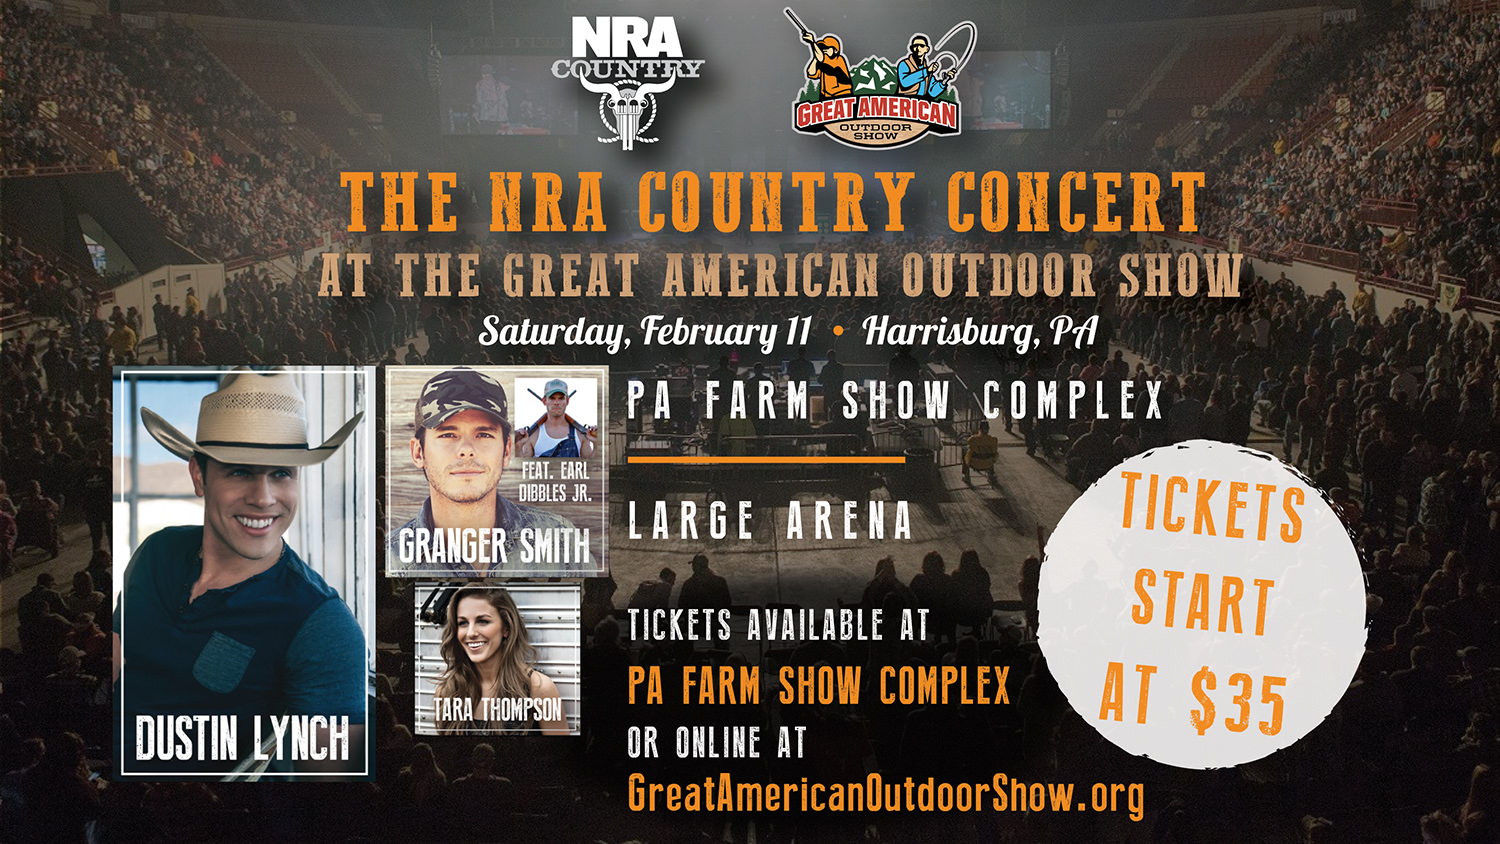 Enter to Win 2 Free Tickets to the NRA Country Concert at the Great American Outdoor Show